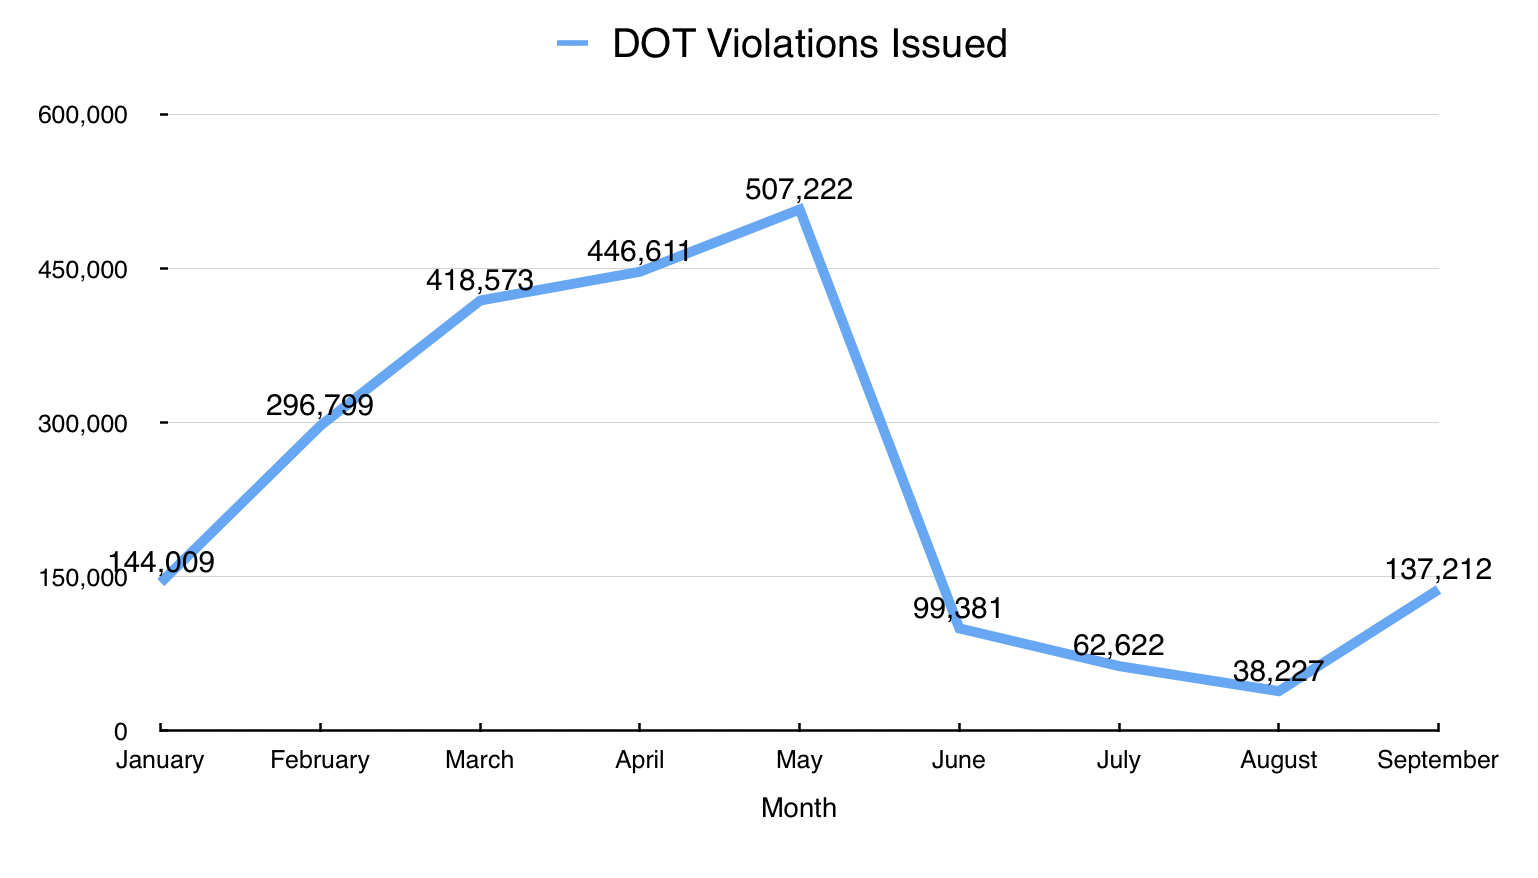 Dot violations issued in 2022